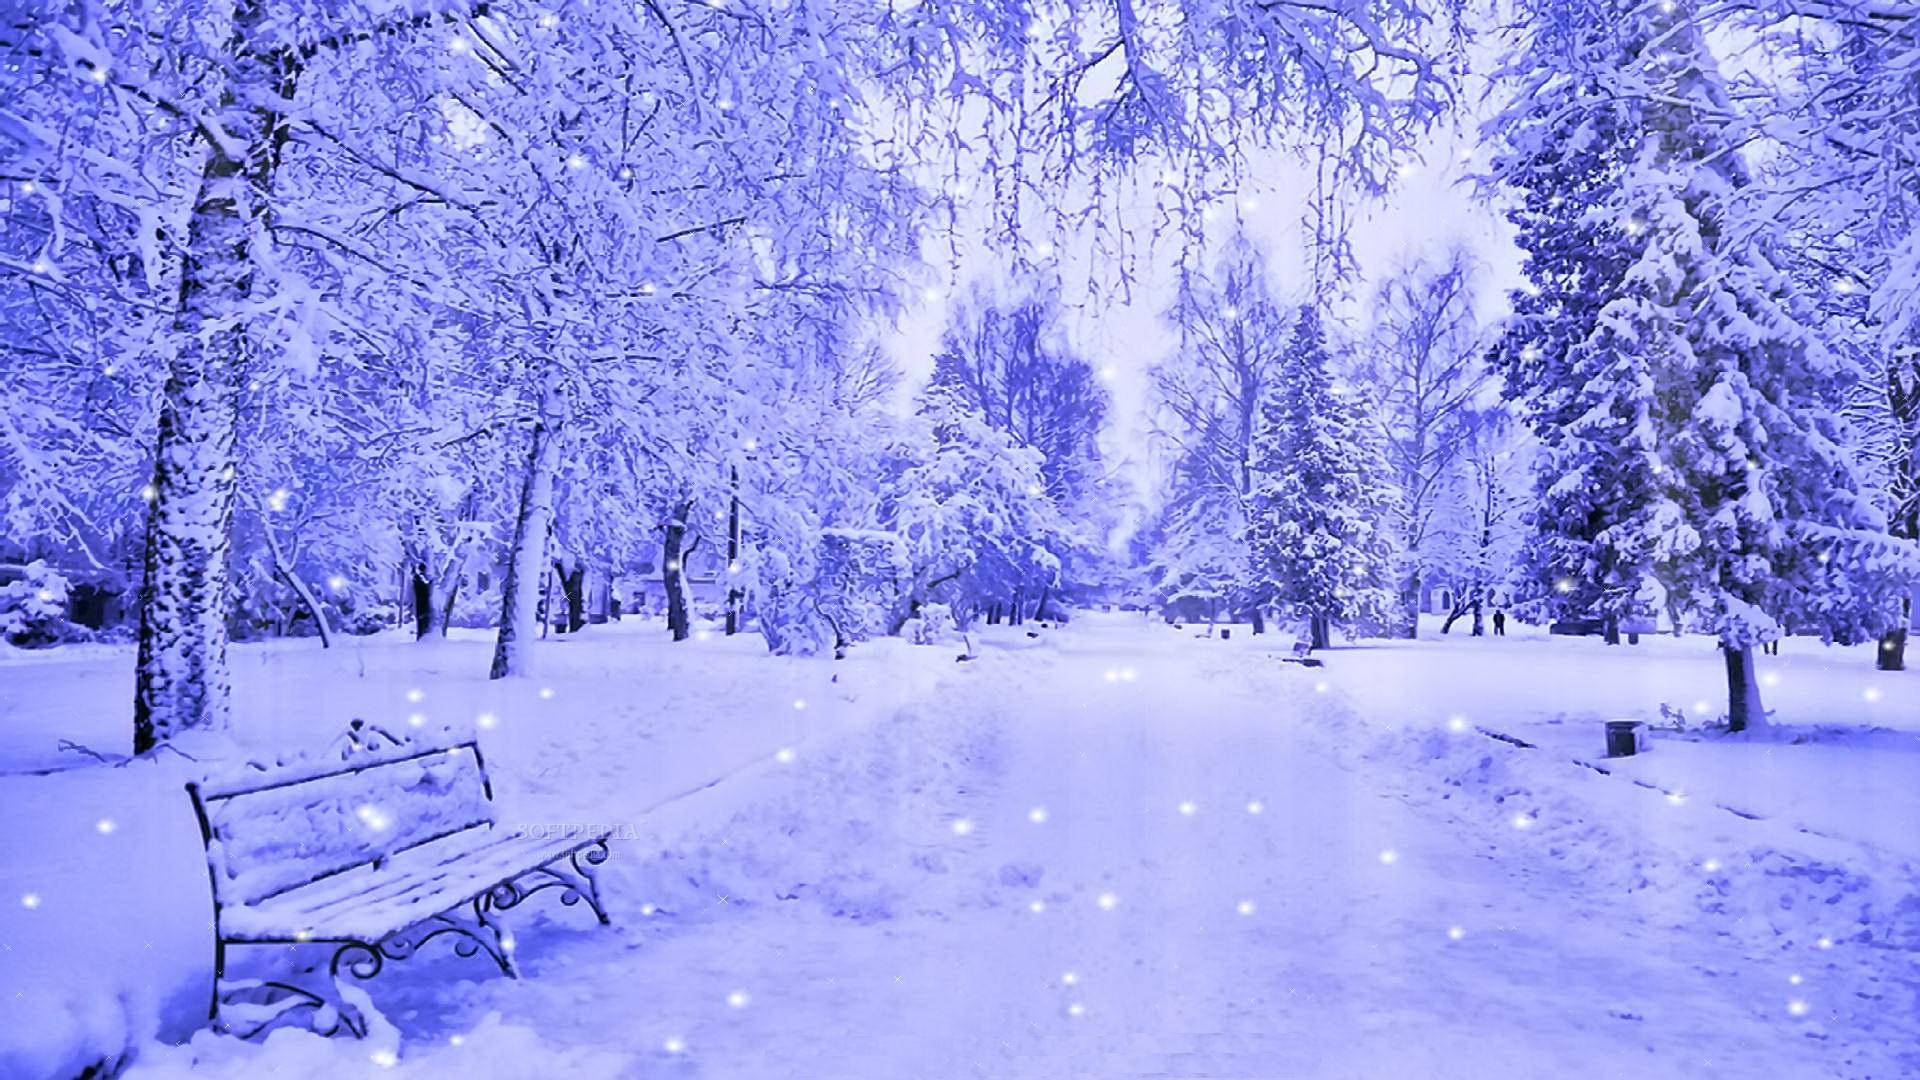 A Blue Snowy Park With A Bench And Trees Background